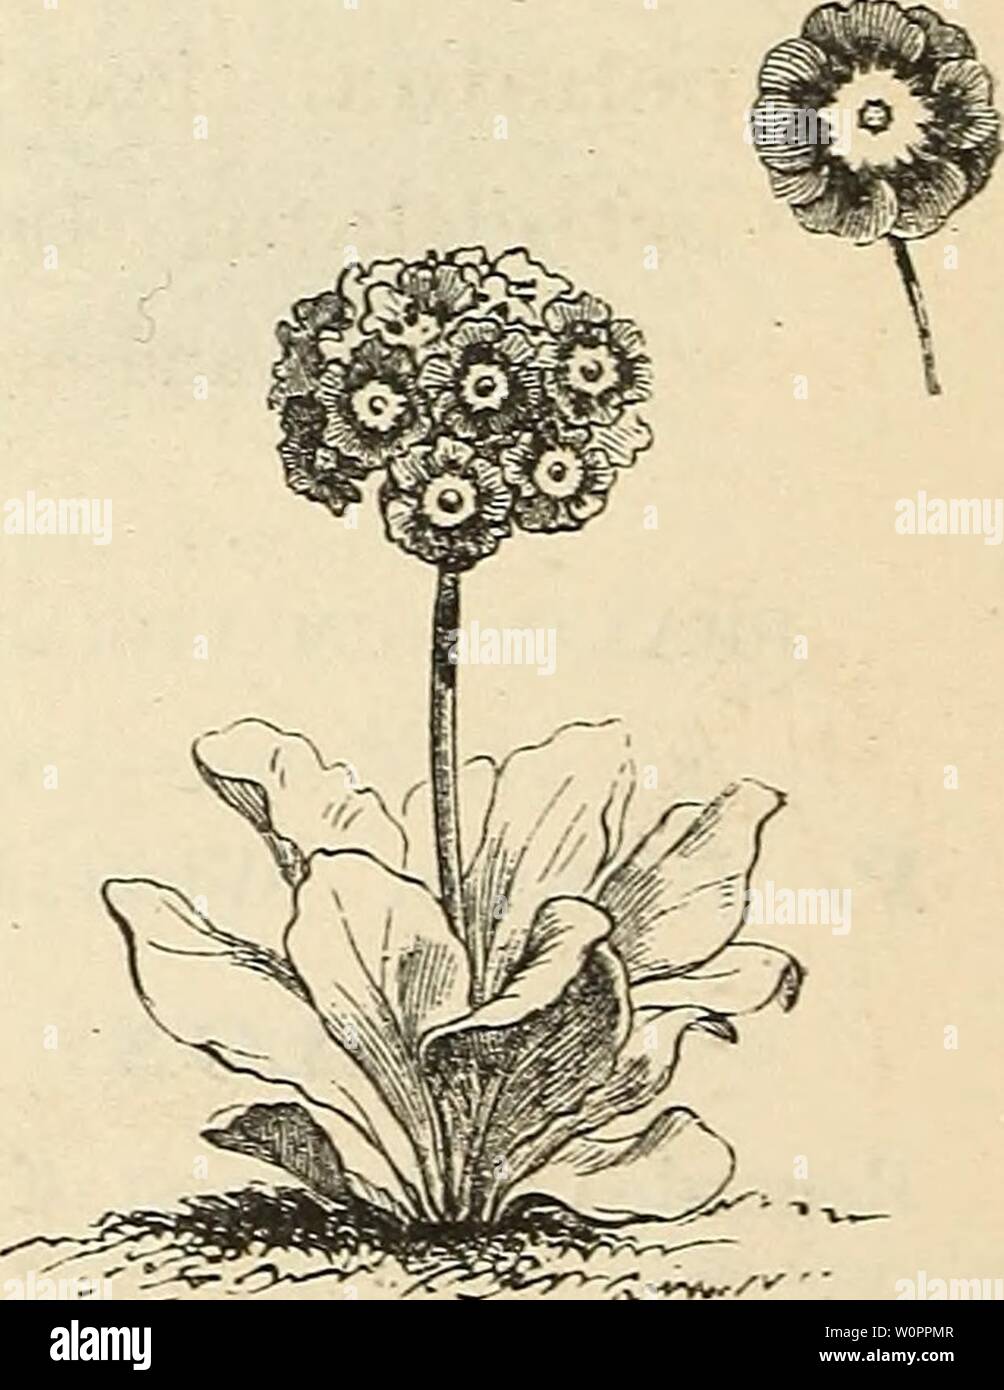 Archive image from page 113 of Descriptive catalogue of hardy ornamental. Descriptive catalogue of hardy ornamental trees, shrubs, herbaceous perennial plants, etc. : twenty-fourth edition descriptivecatal1880ellw Year: 1880  POLEMONIUM CJERULEUM. Poa. P. australis. A perennial grass forming feathery tufts 1J to 2 feet high ; fine. POLEMONIUM. Greek Valerian. P. cseruleuin. Jacob's Ladder. Blue; in terminal panicles ; 1 foot. July. P. reptans. A low, spreading plant; blue; 6 inches. June. POLYGONUM. P. cuspidatum. Giant Knotweed. Flowers white, in clusters late in summer, followed by handsome Stock Photo